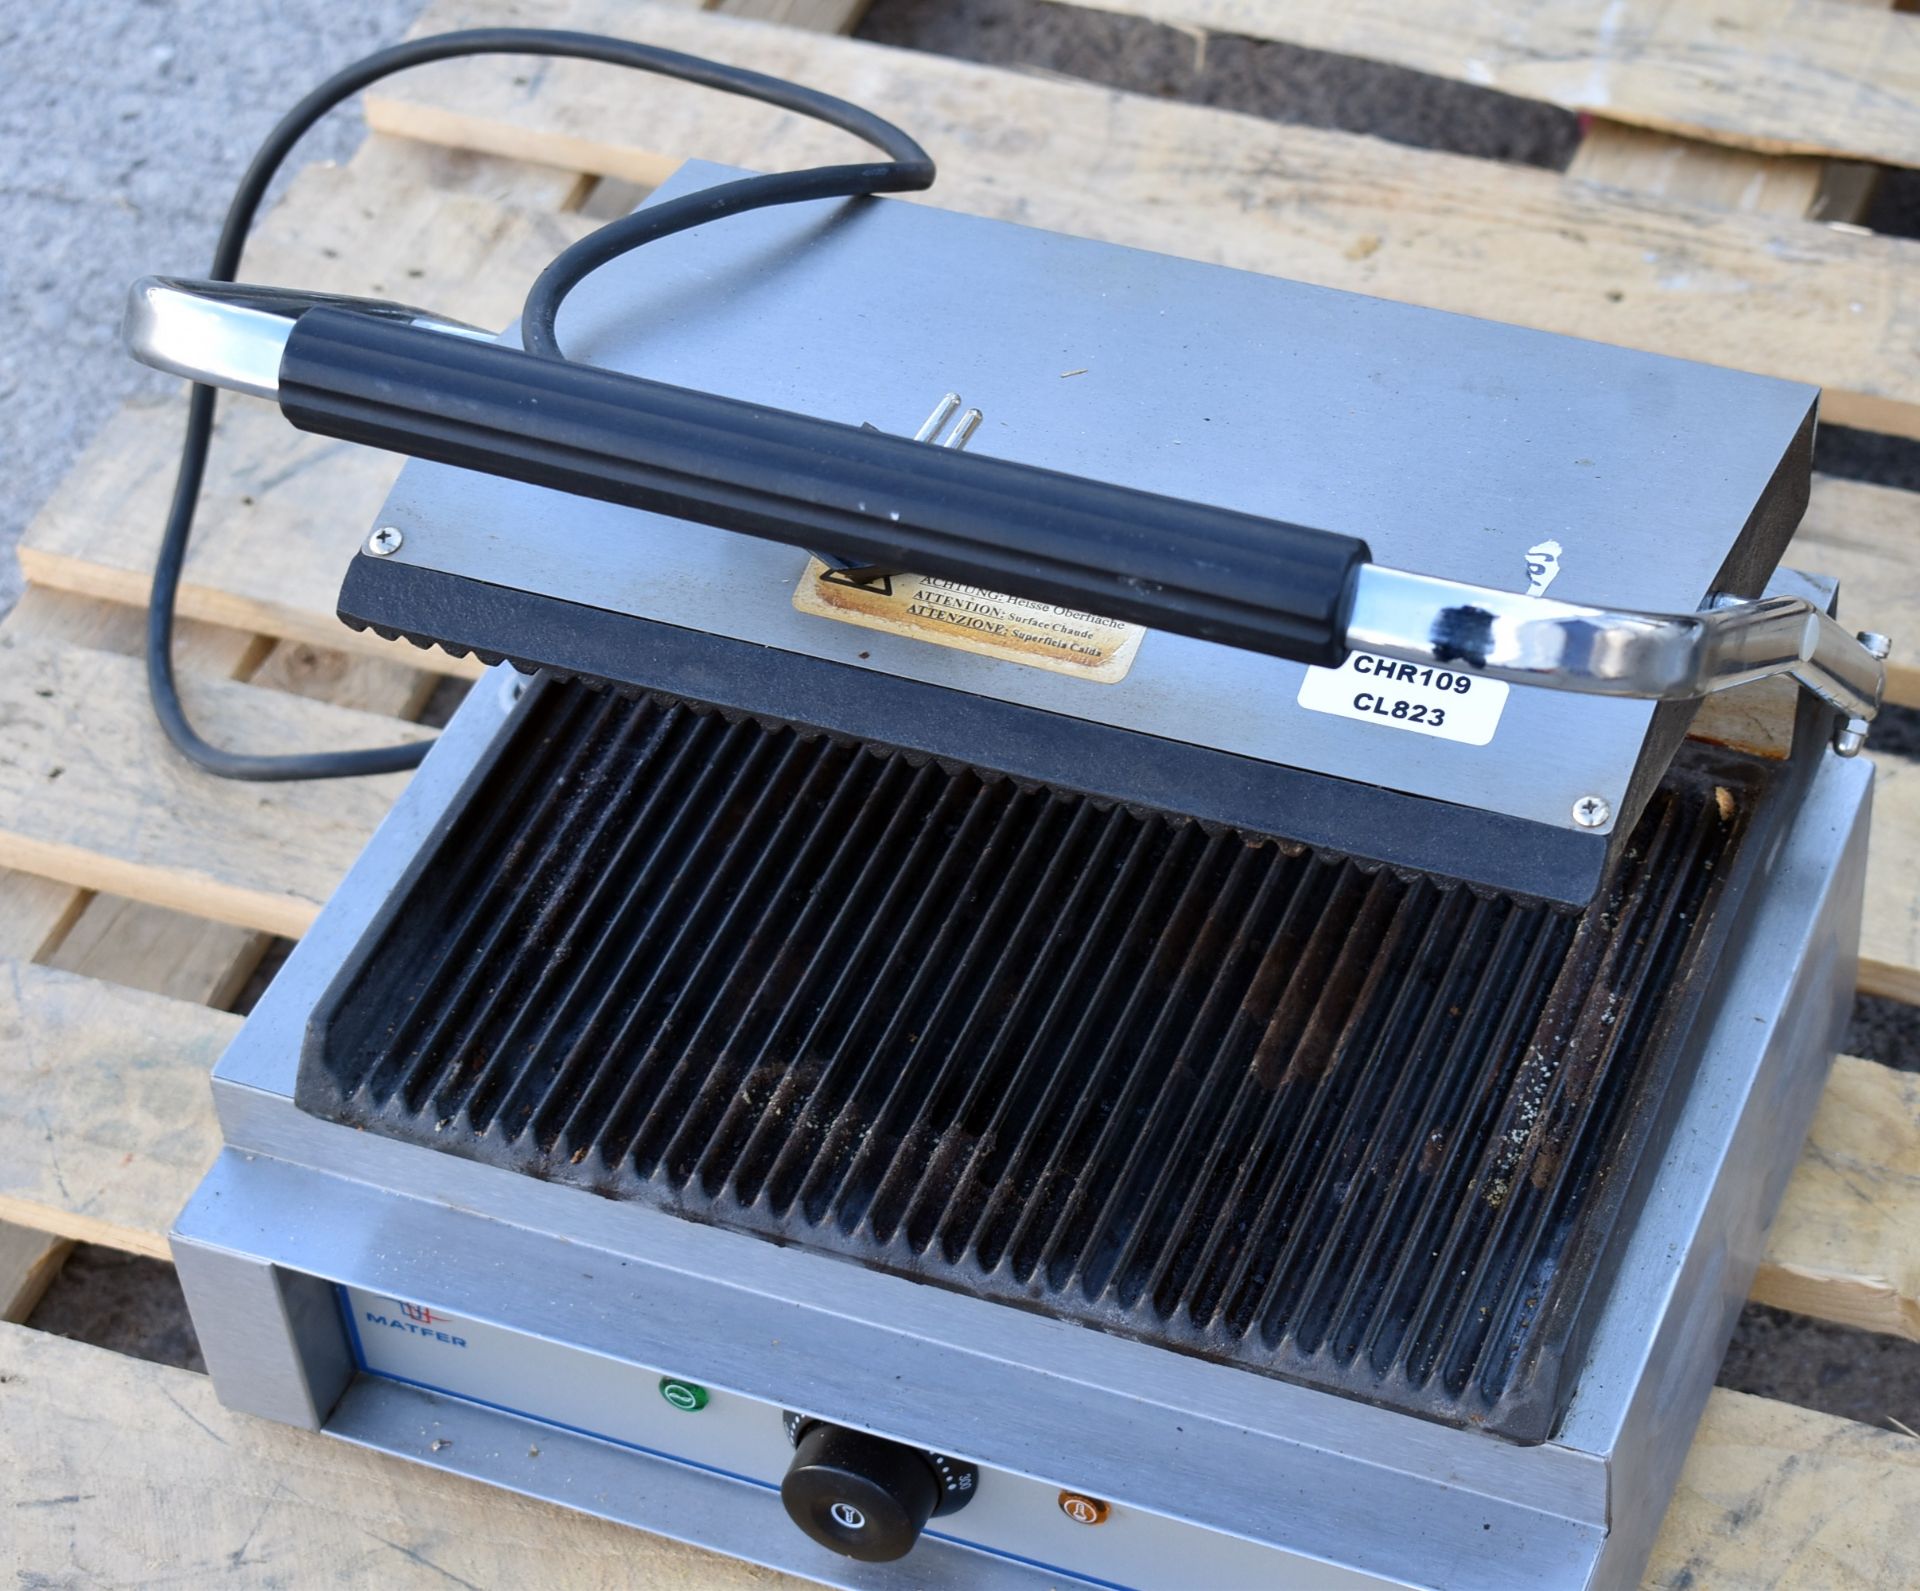 1 x Matfer GH-811PK 2200W Contact Grill - Image 2 of 7